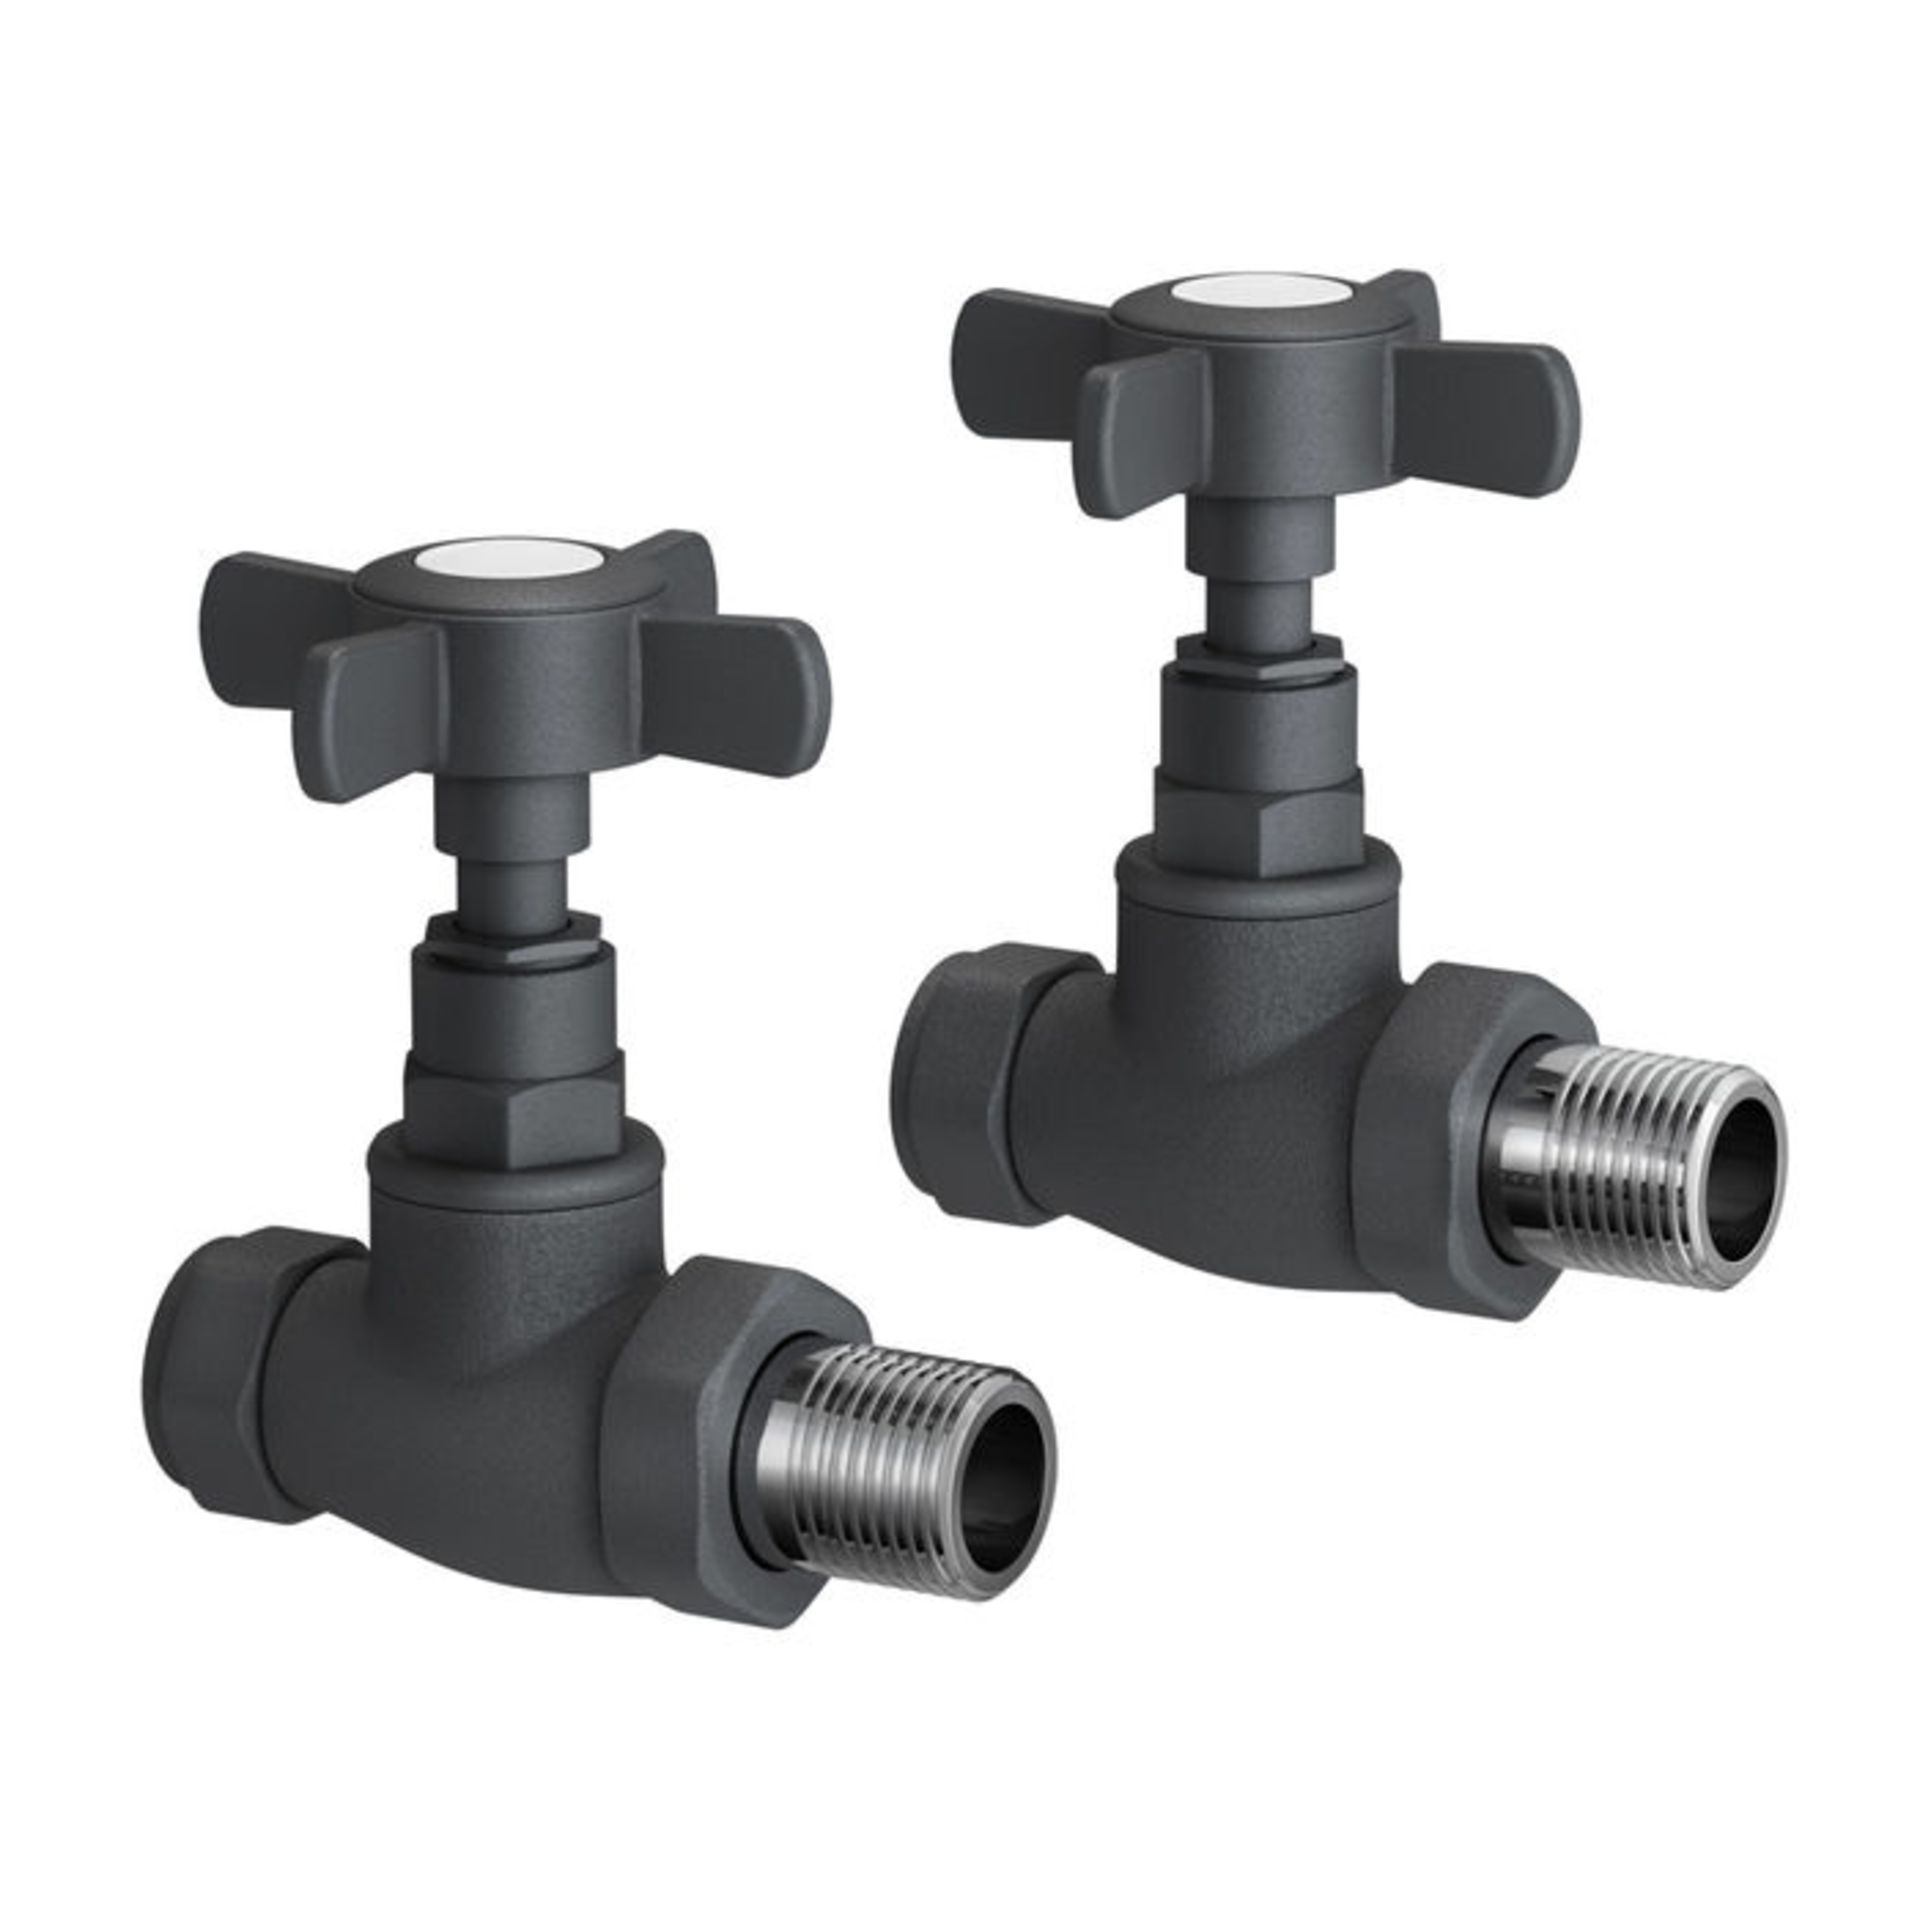 (AL271) Anthracite Standard Connection Straight Radiator Valves 15mm Contemporary anthracite